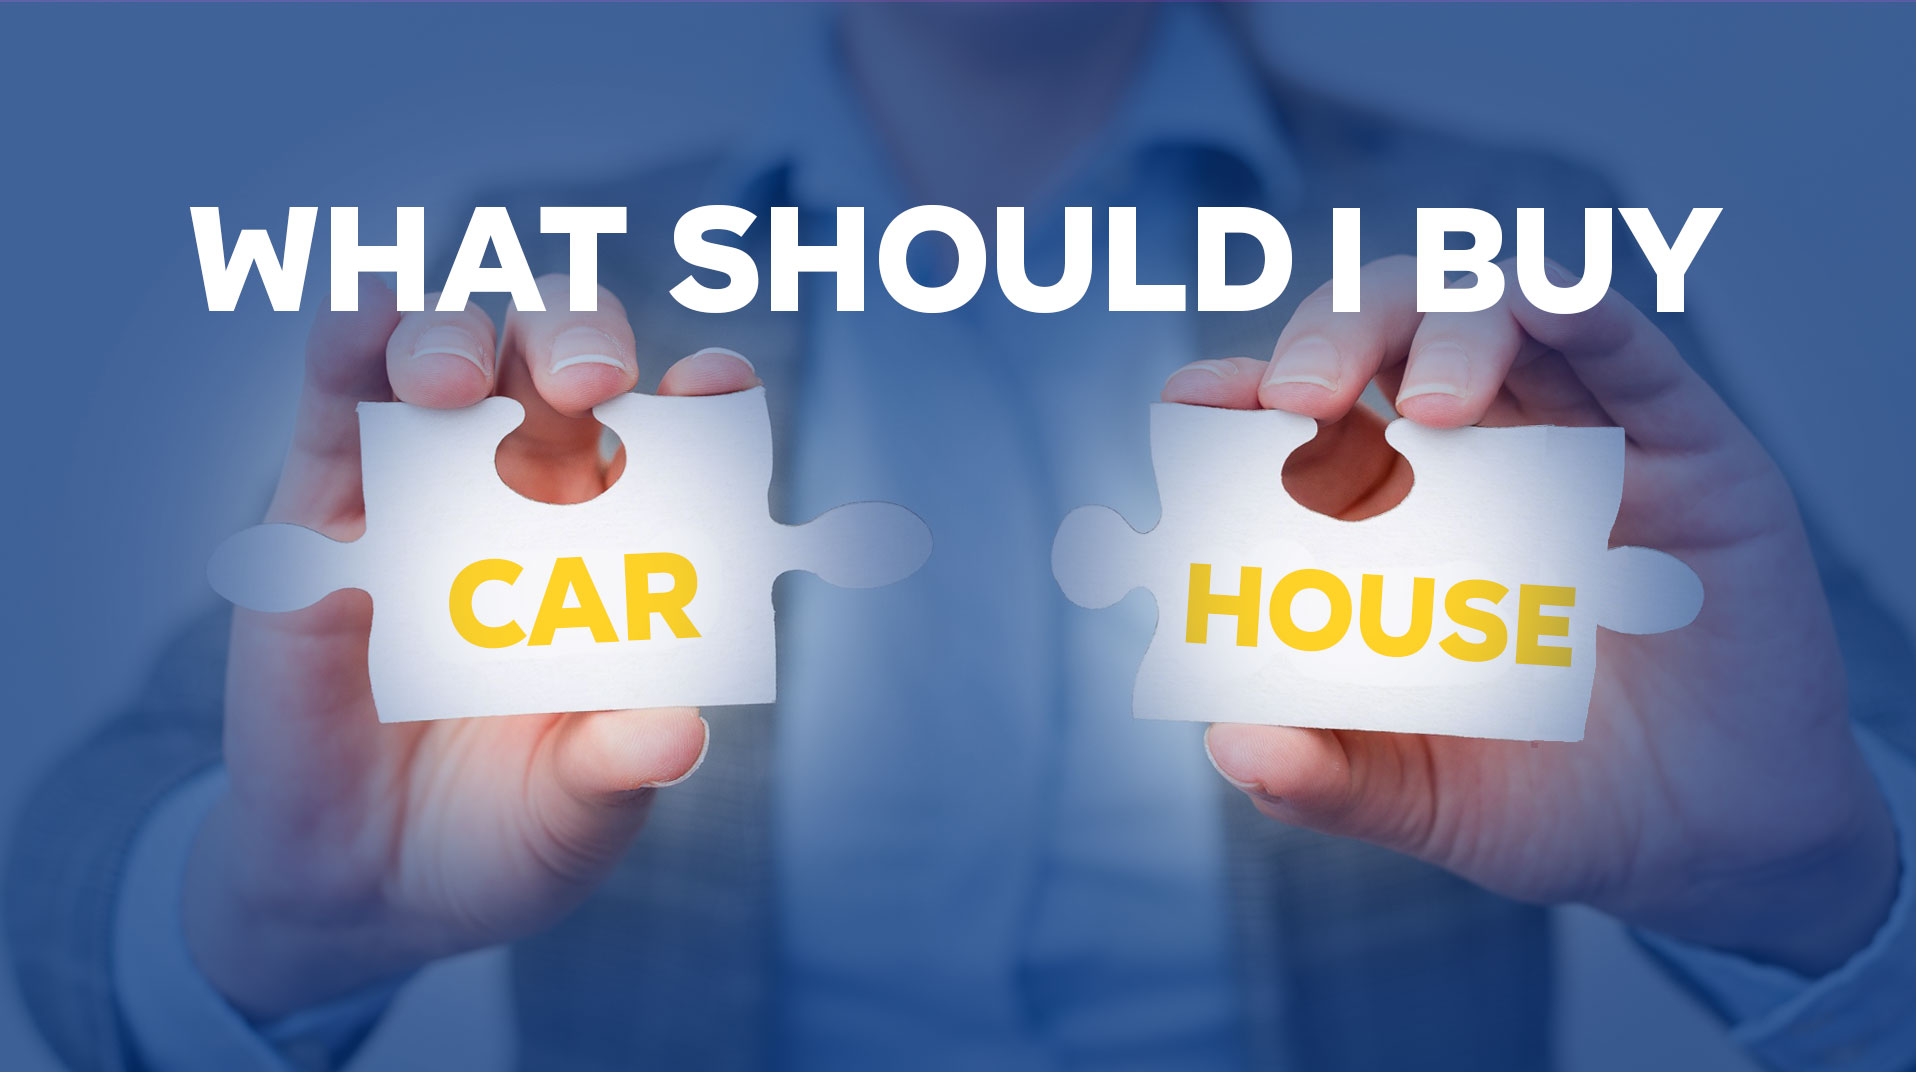 what-should-i-buy-car-or-house